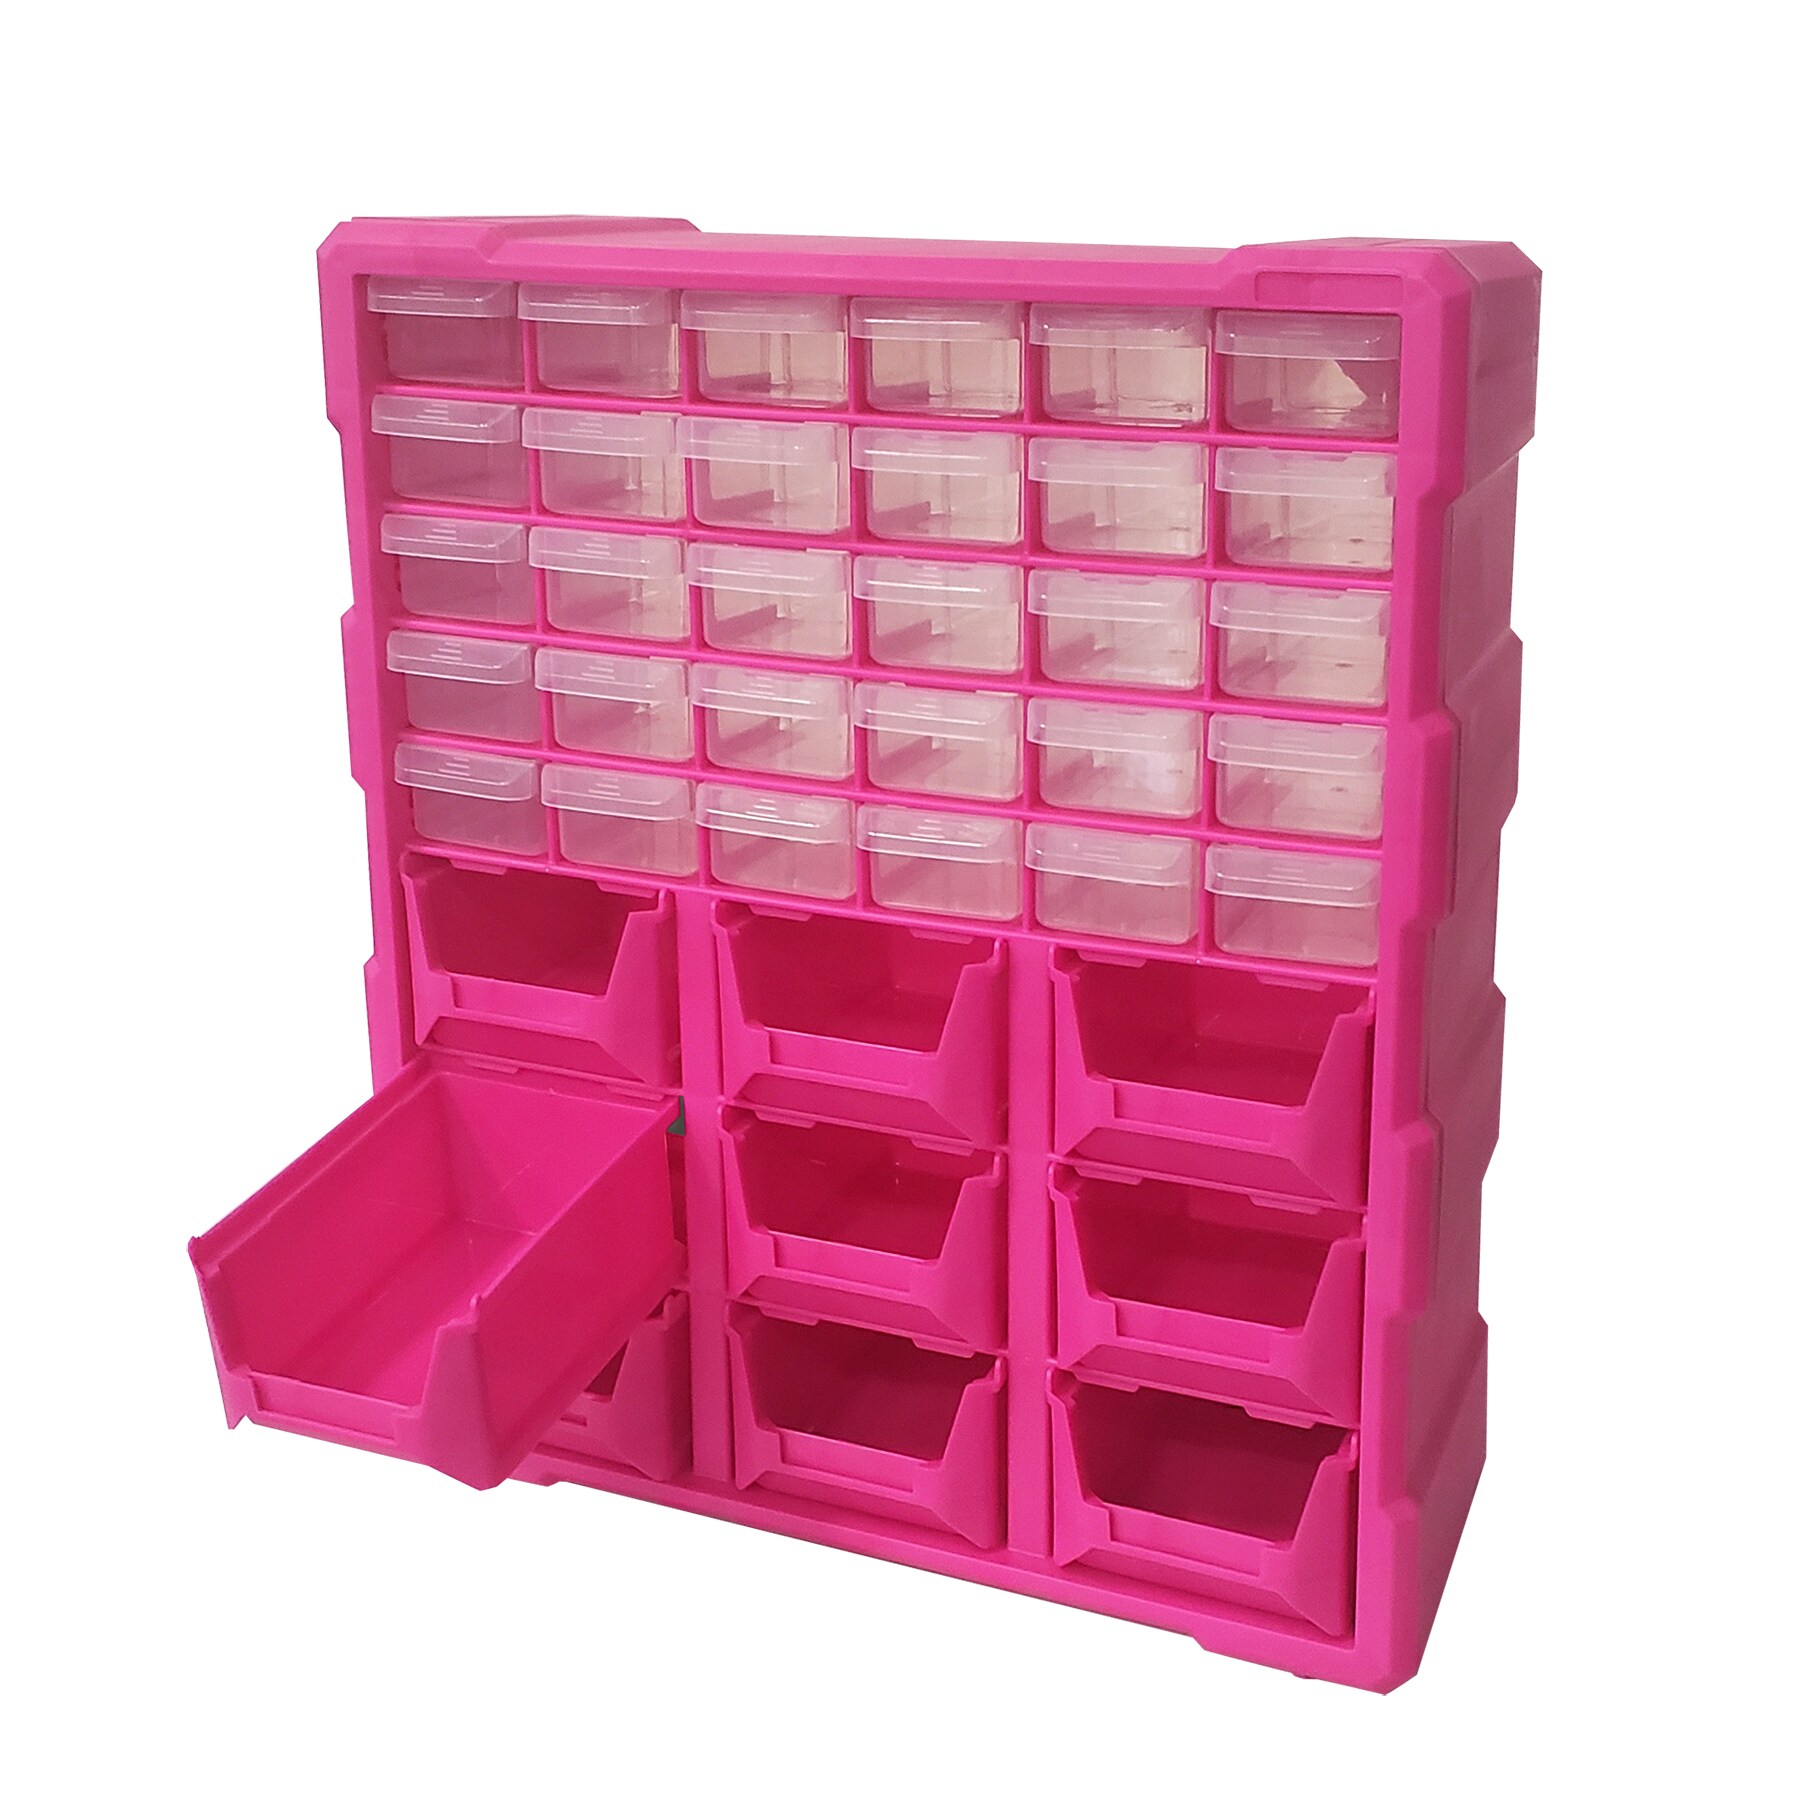 Hardware And Craft Storage Organizer Cabinet, 39 Compartment Drawers And  Bins, Plastic Container For Storing And Organization, Black And Red  BX08-4015 